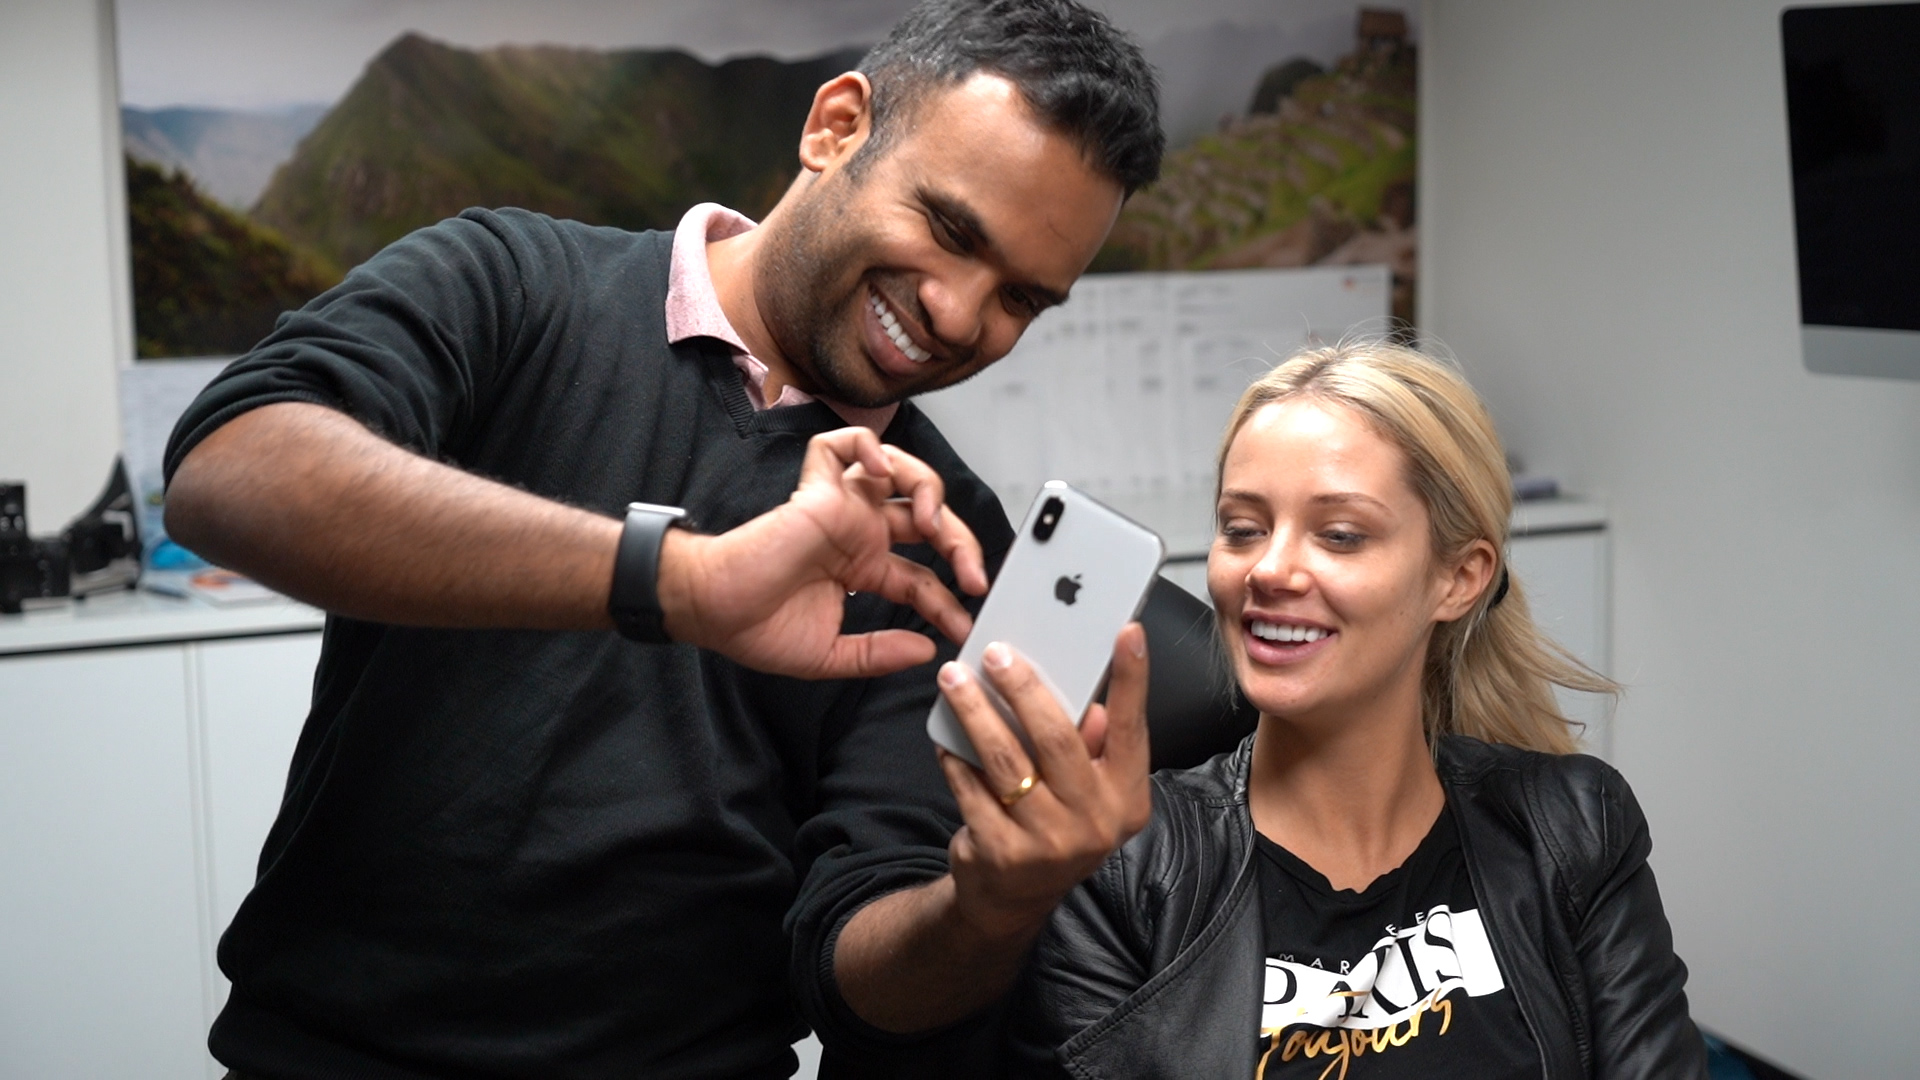 Dr Dee with Jessika Power looking at phone together at Vogue Dental Studios